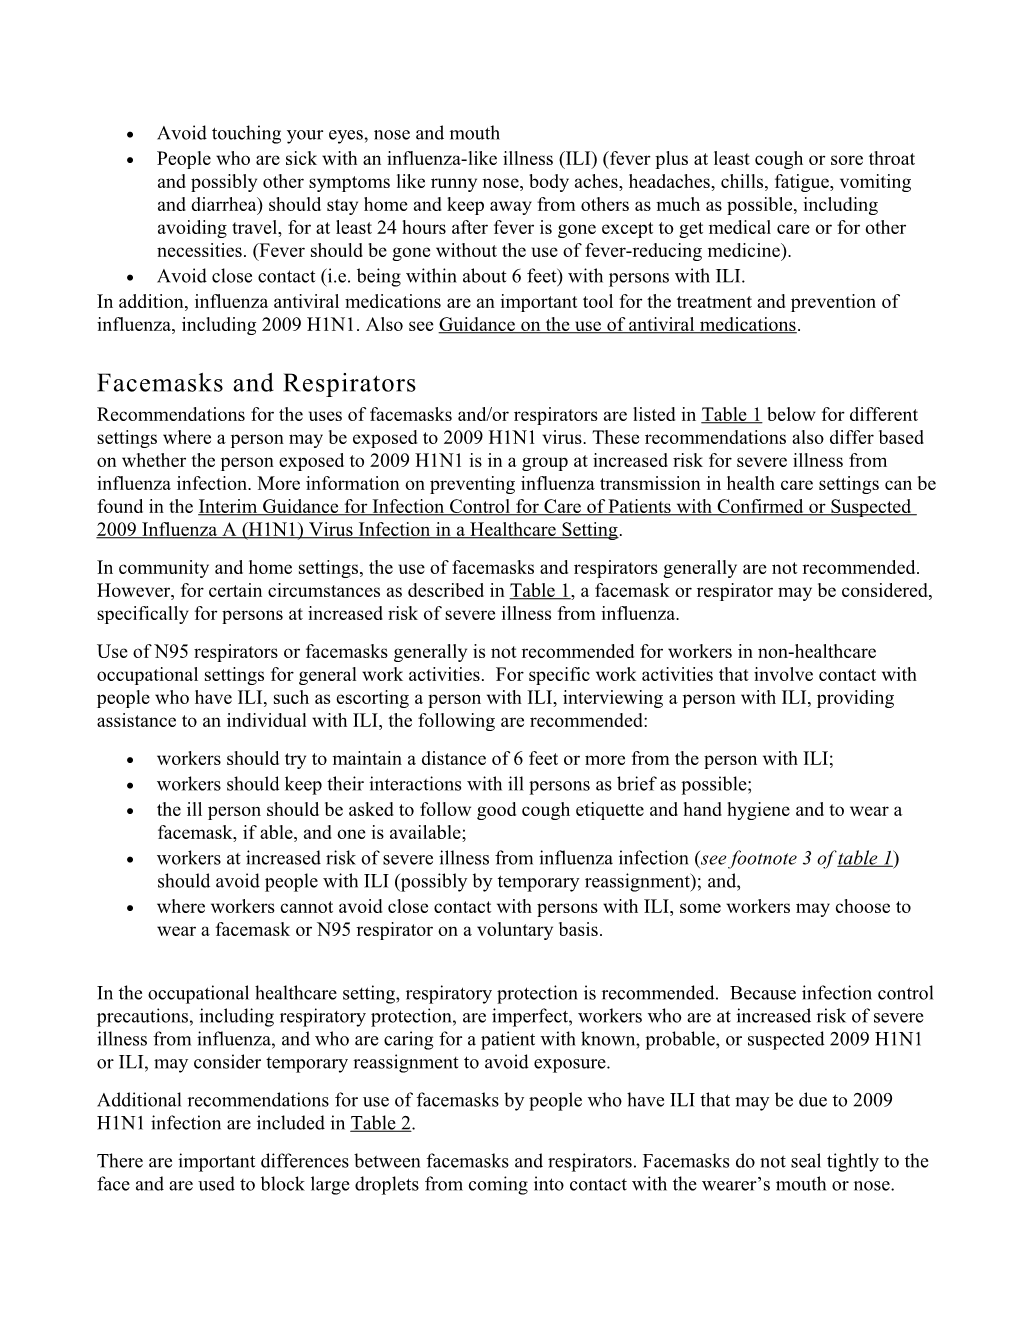 Interim Recommendations for Facemask and Respirator Use to Reduce 2009 Influenza a (H1N1)